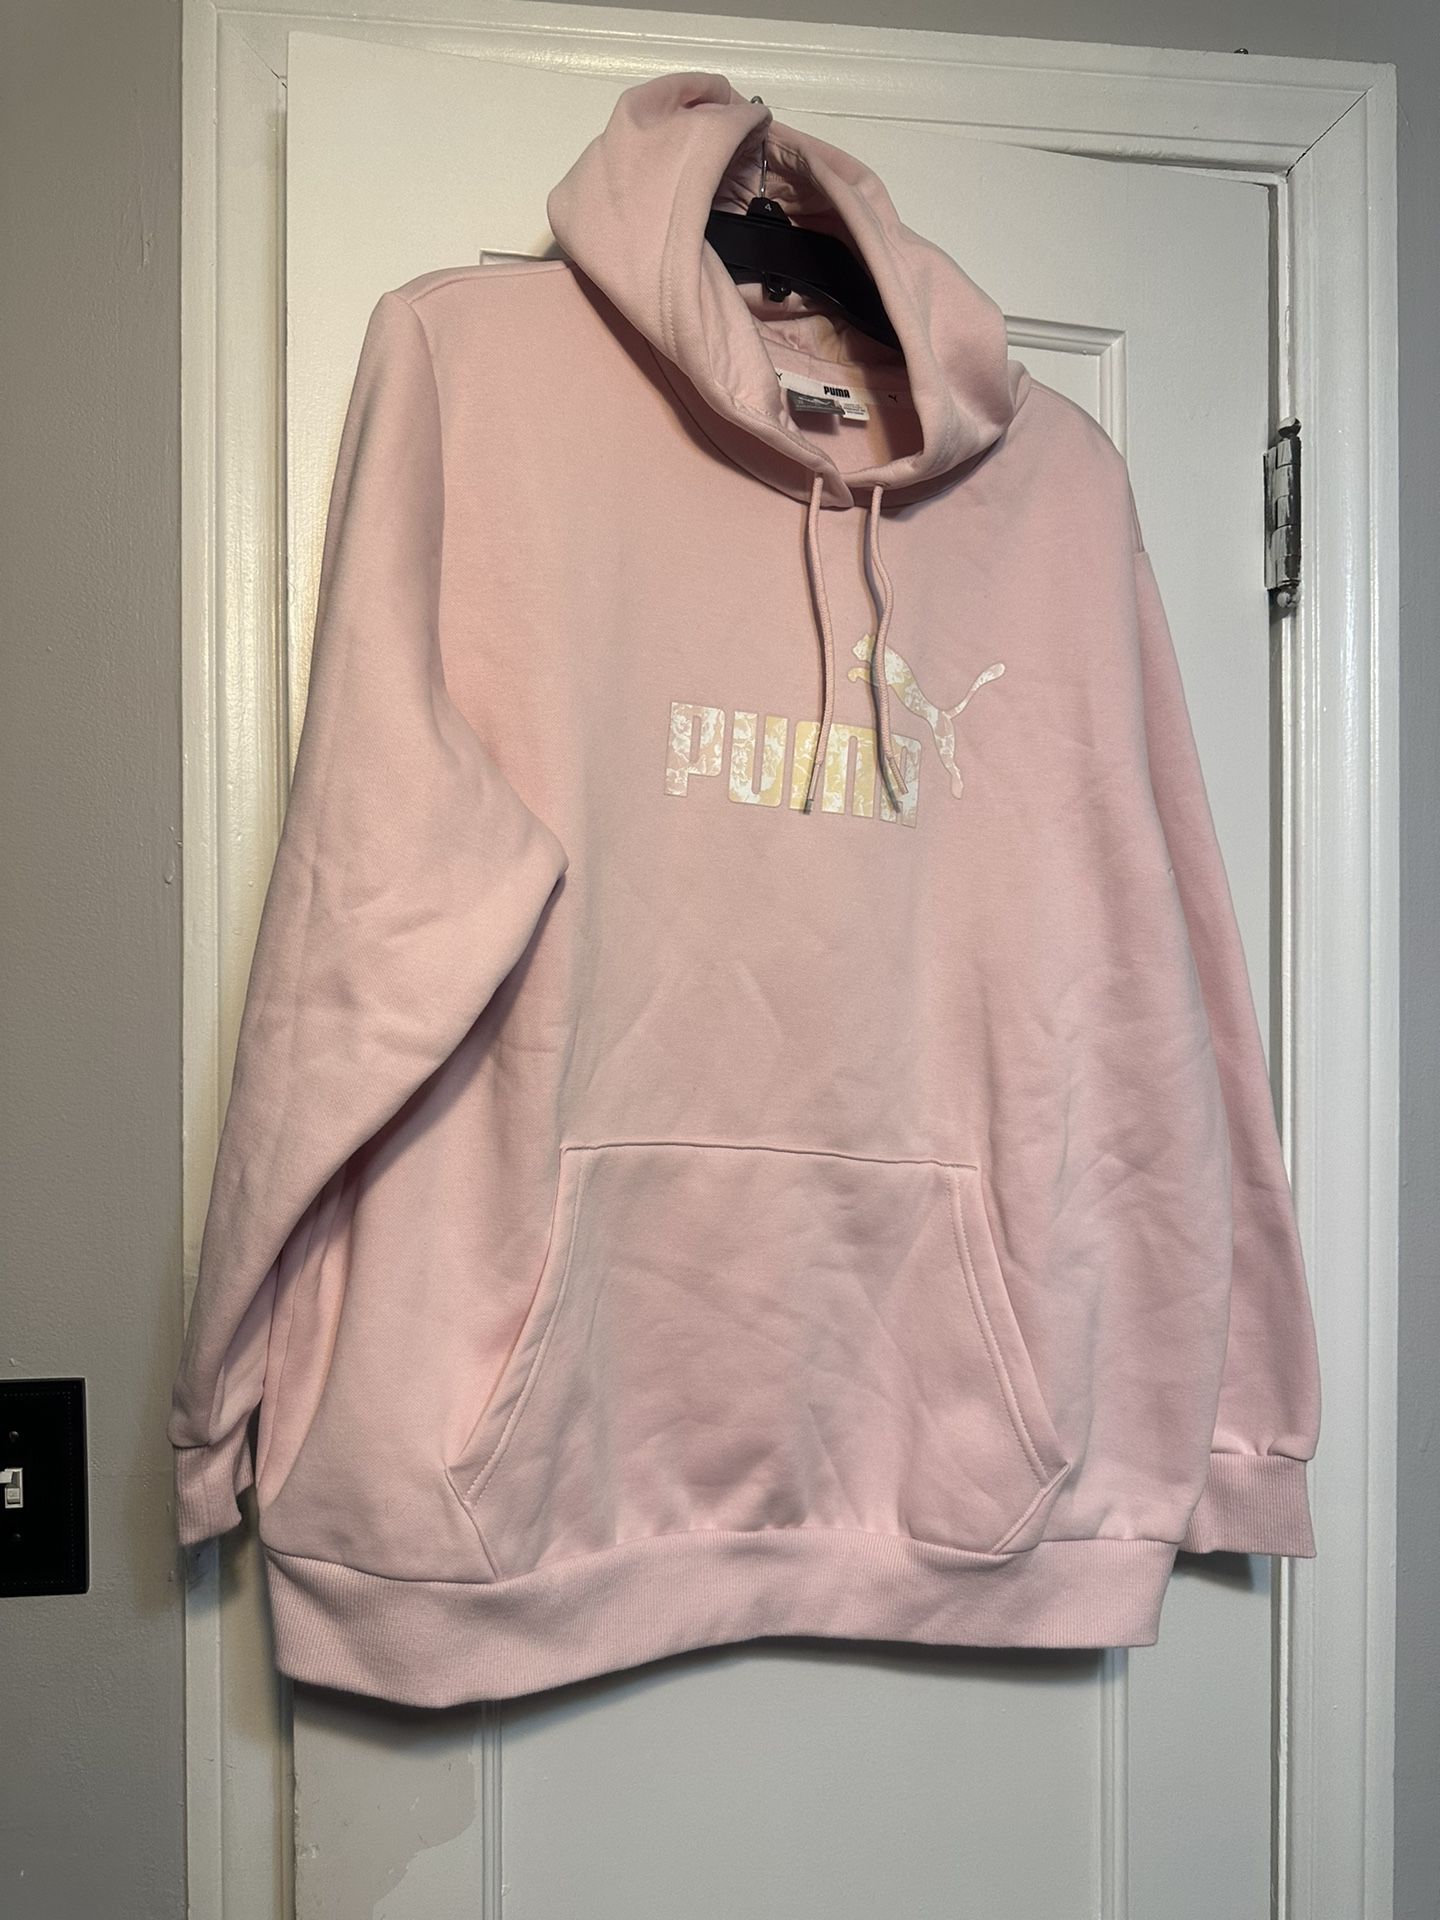 New Women Puma hoodie, without tag